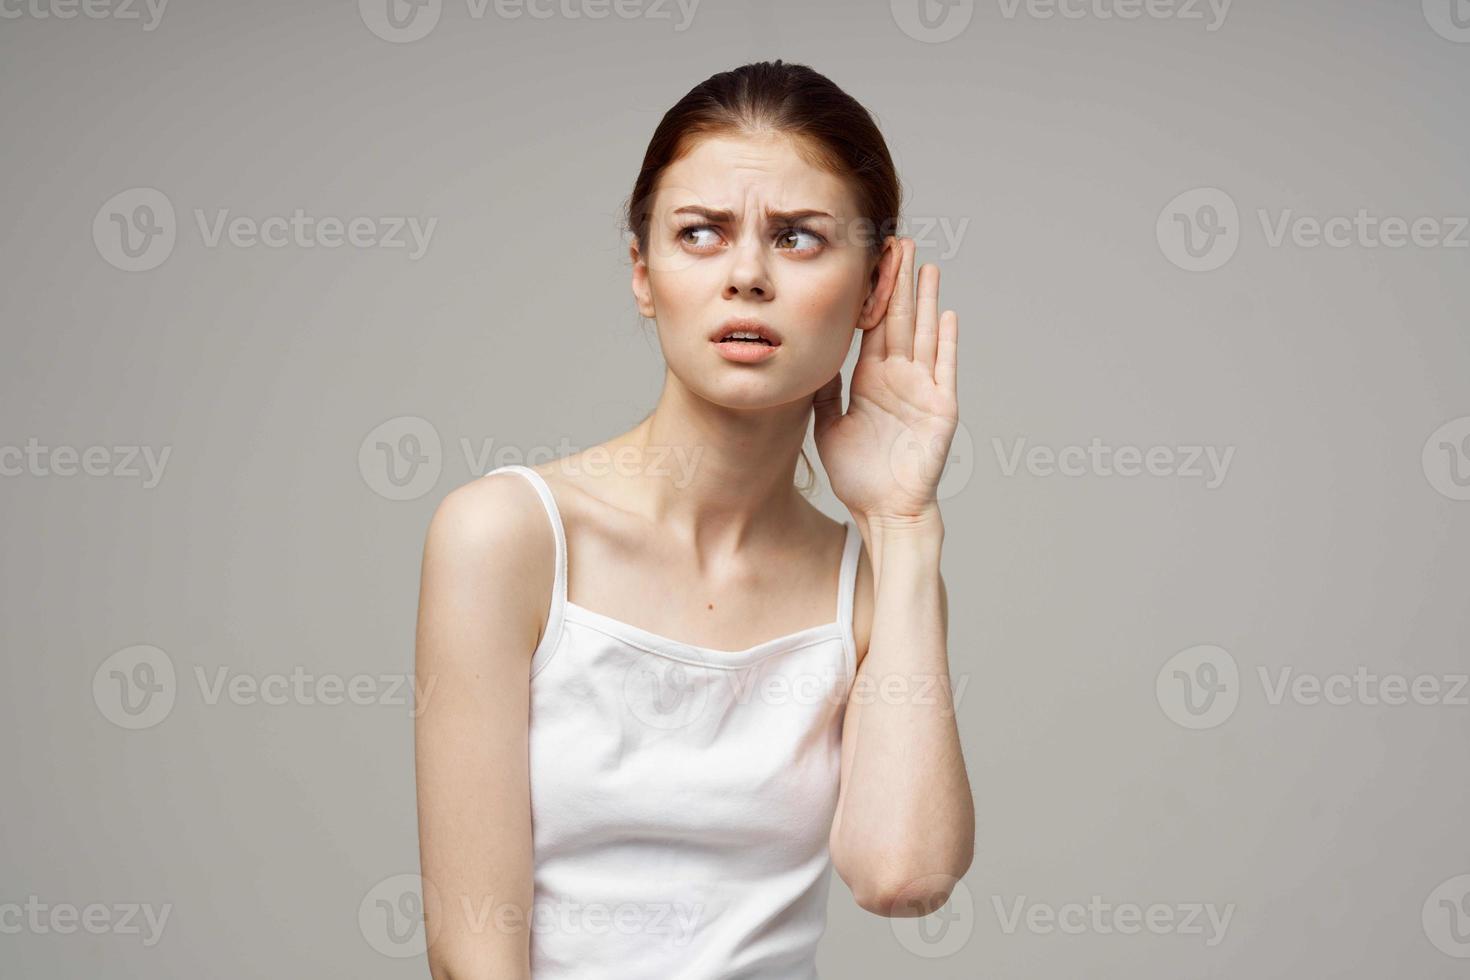 sick woman poor hearing disorders in white t-shirts light background photo